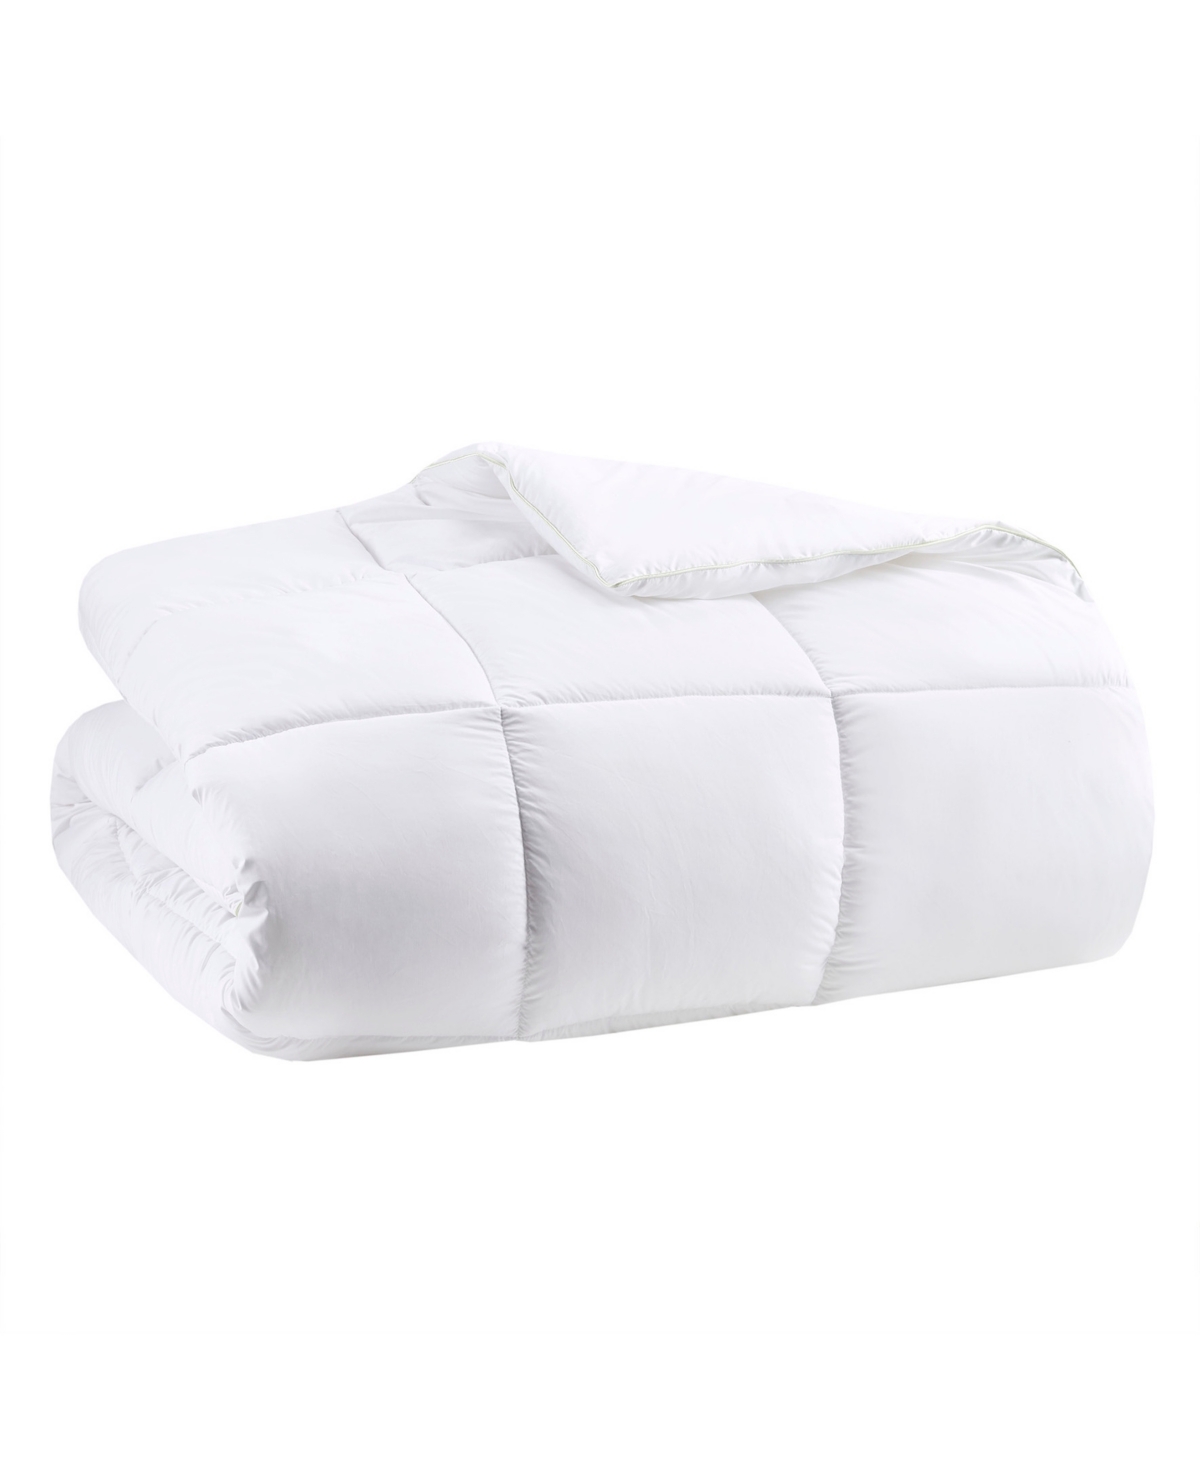 Clean Spaces Allergen Barrier Microbial Resistant Down-alternative Comforter,, Full/queen In White